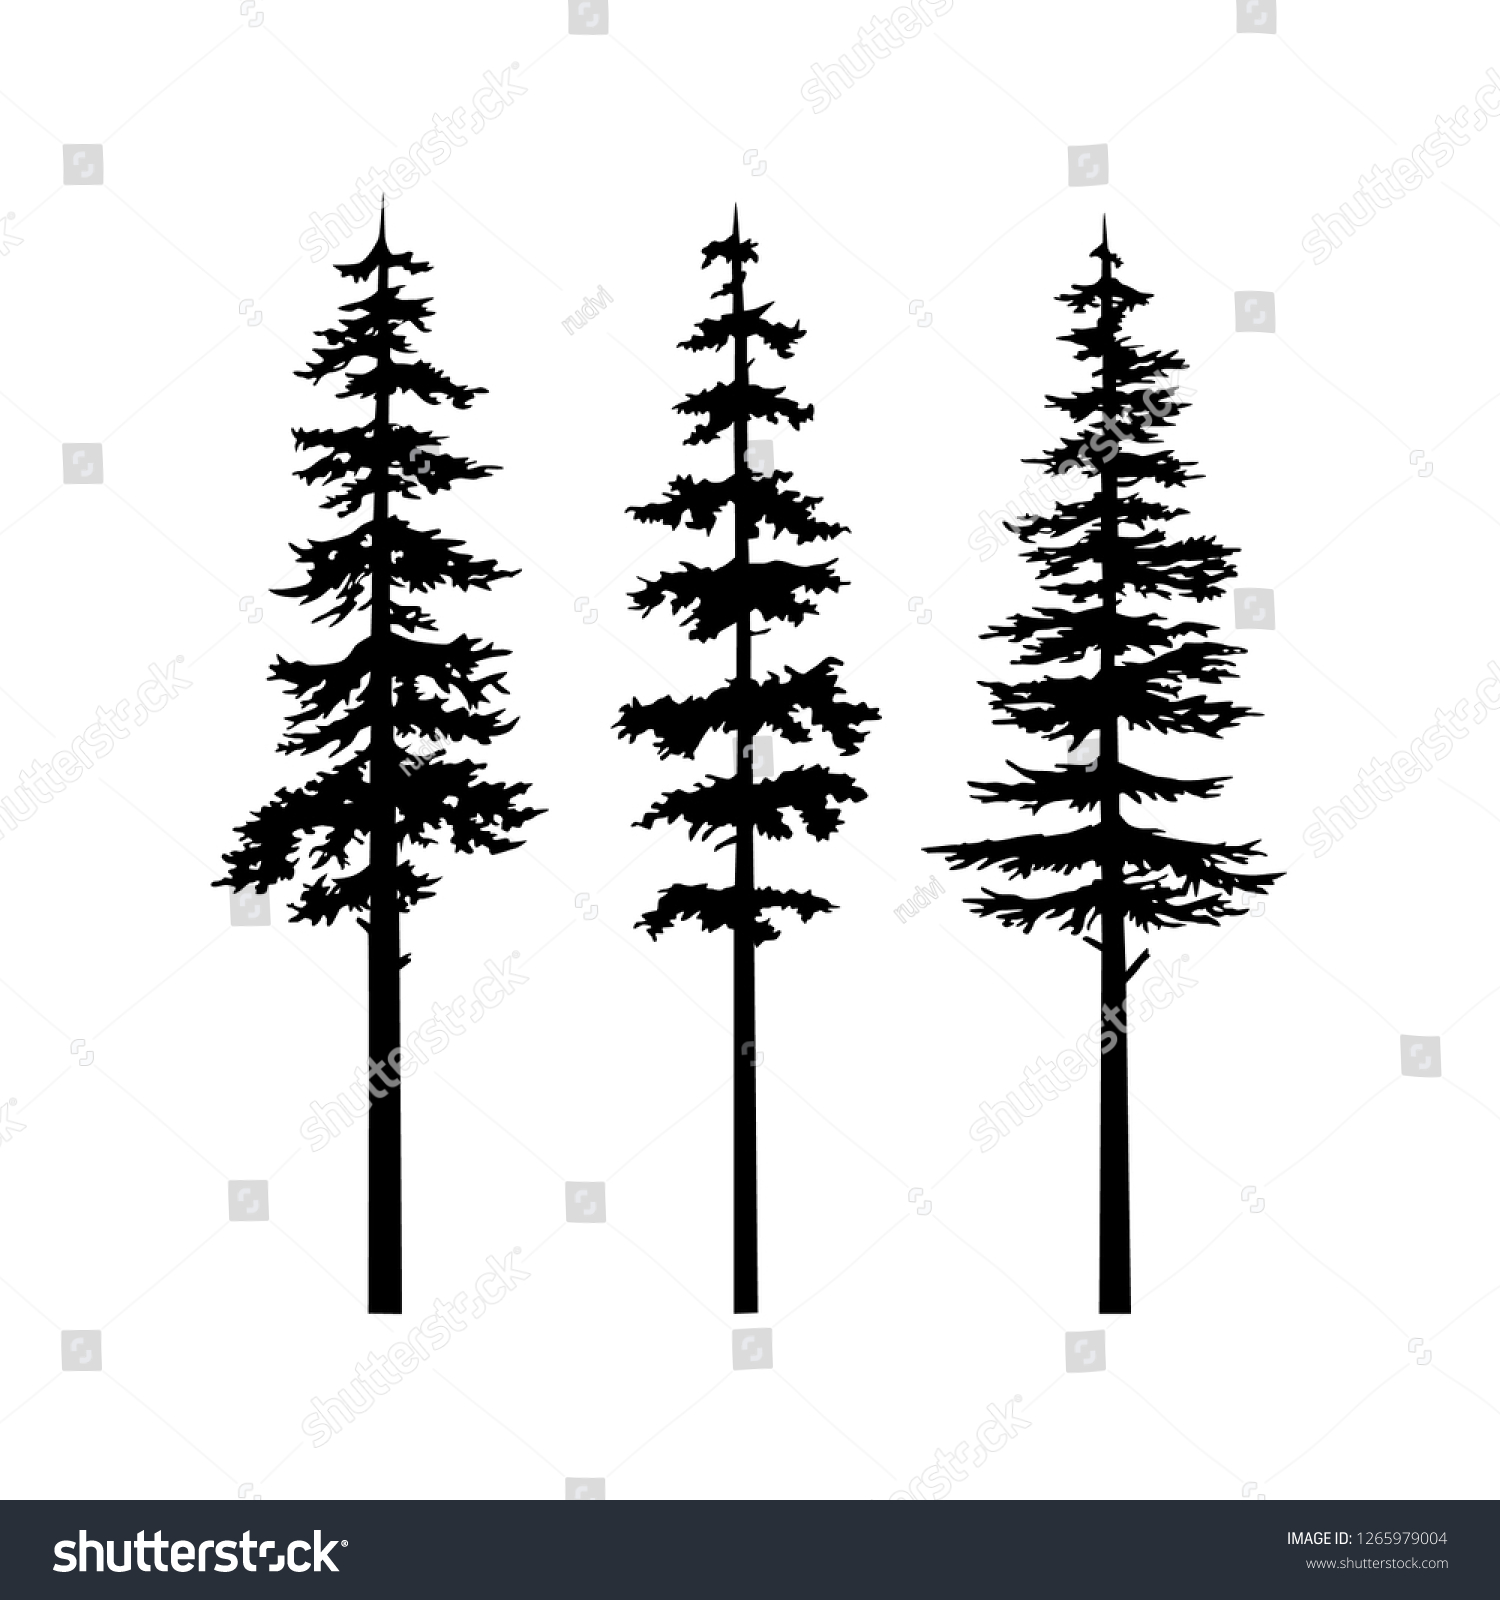 SVG of Black Tree Silhouette vector, collection tree cypress silhouette, coniferous nature vector set isolated illustration, tribal art templates, tattoo idea. Sketch for interior design and clothing design svg